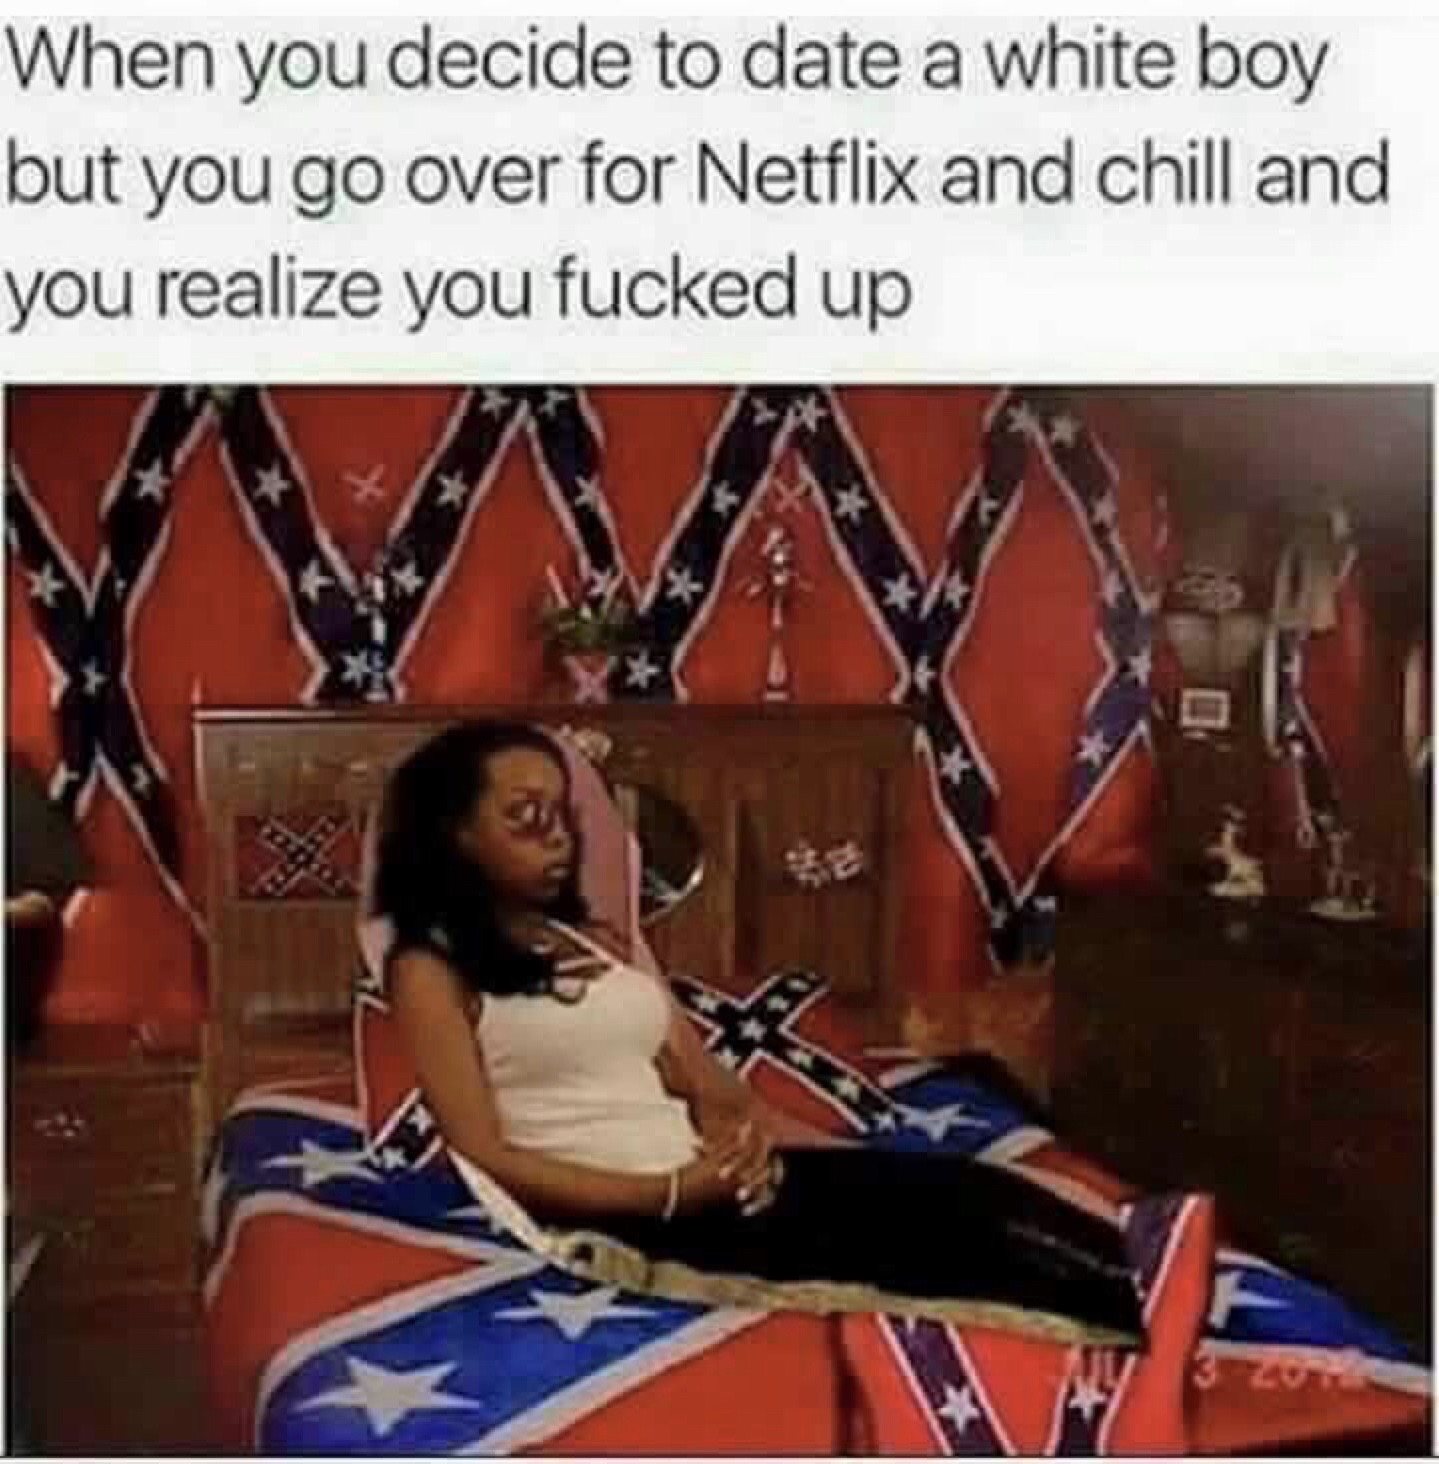 you date a white guy meme - When you decide to date a white boy but you go over for Netflix and chill and you realize you fucked up